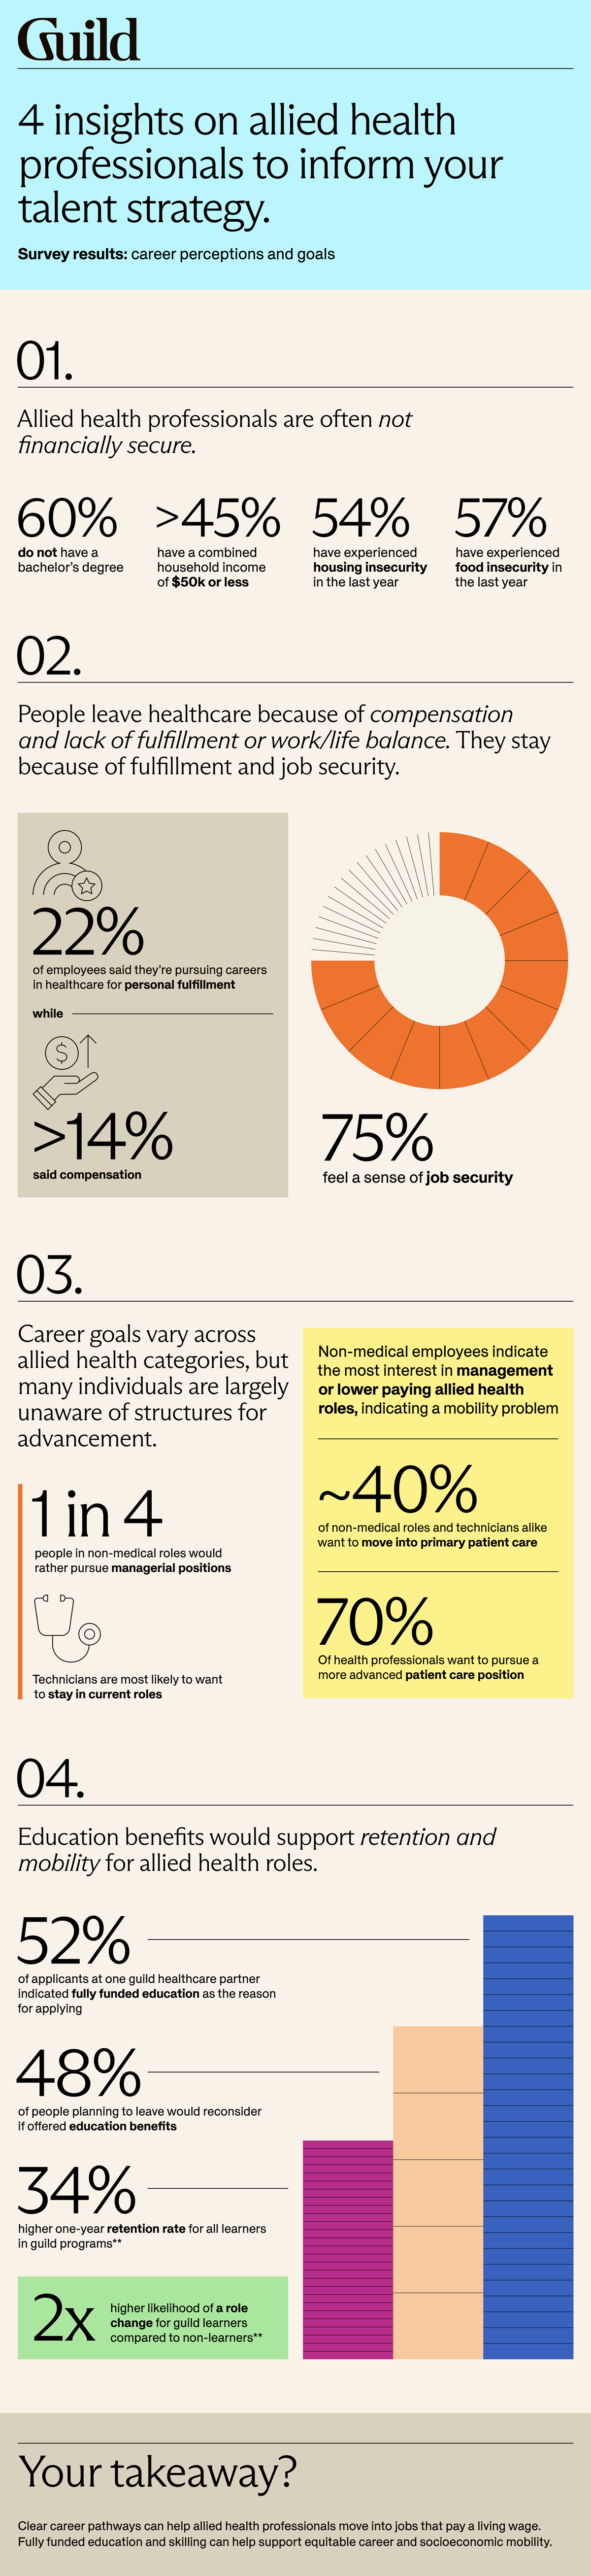 Infographic on 4 insights on allied health professionals to inform your talent strategy. 1. Allied health professionals are often not financially secure. 60% do not have a bachelor’s degree, >45% have a combined household income of $50k or less, 54% have experiences housing insecurity in the last year, and 57% have experienced food insecurity in the last year. 2. People leave healthcare because of compensation and lack of fulfillment or work/life balance. They stay because of fulfillment and job security. 22% of employees said they’re pursuing careers in healthcare for personal fulfillment, while > 14% said compensation. 75% feel a sense of job security. 3. Career goals vary across allied health categories, but many individuals are largely unaware of structures for advancement. 1 in 4 people in non-medical roles would rather pursue managerial positions. Technicians are most likely to want to stay in current roles. ~40% of non-medical roles and technicians alike want to move into primary patient care. 70% of health professionals want to pursue and more advanced care position. 4. Education benefits would support retention and mobility for allied health roles. 52% of applicants at one Guild healthcare partner indicated fully funded education was the reason for applying. 48% if people planning to live would reconsider if offered education benefits. 34% higher one-year retention rates for all learners in Guild programs. 2x higher likelihood of a role change for Guild learners compared to non-learners.